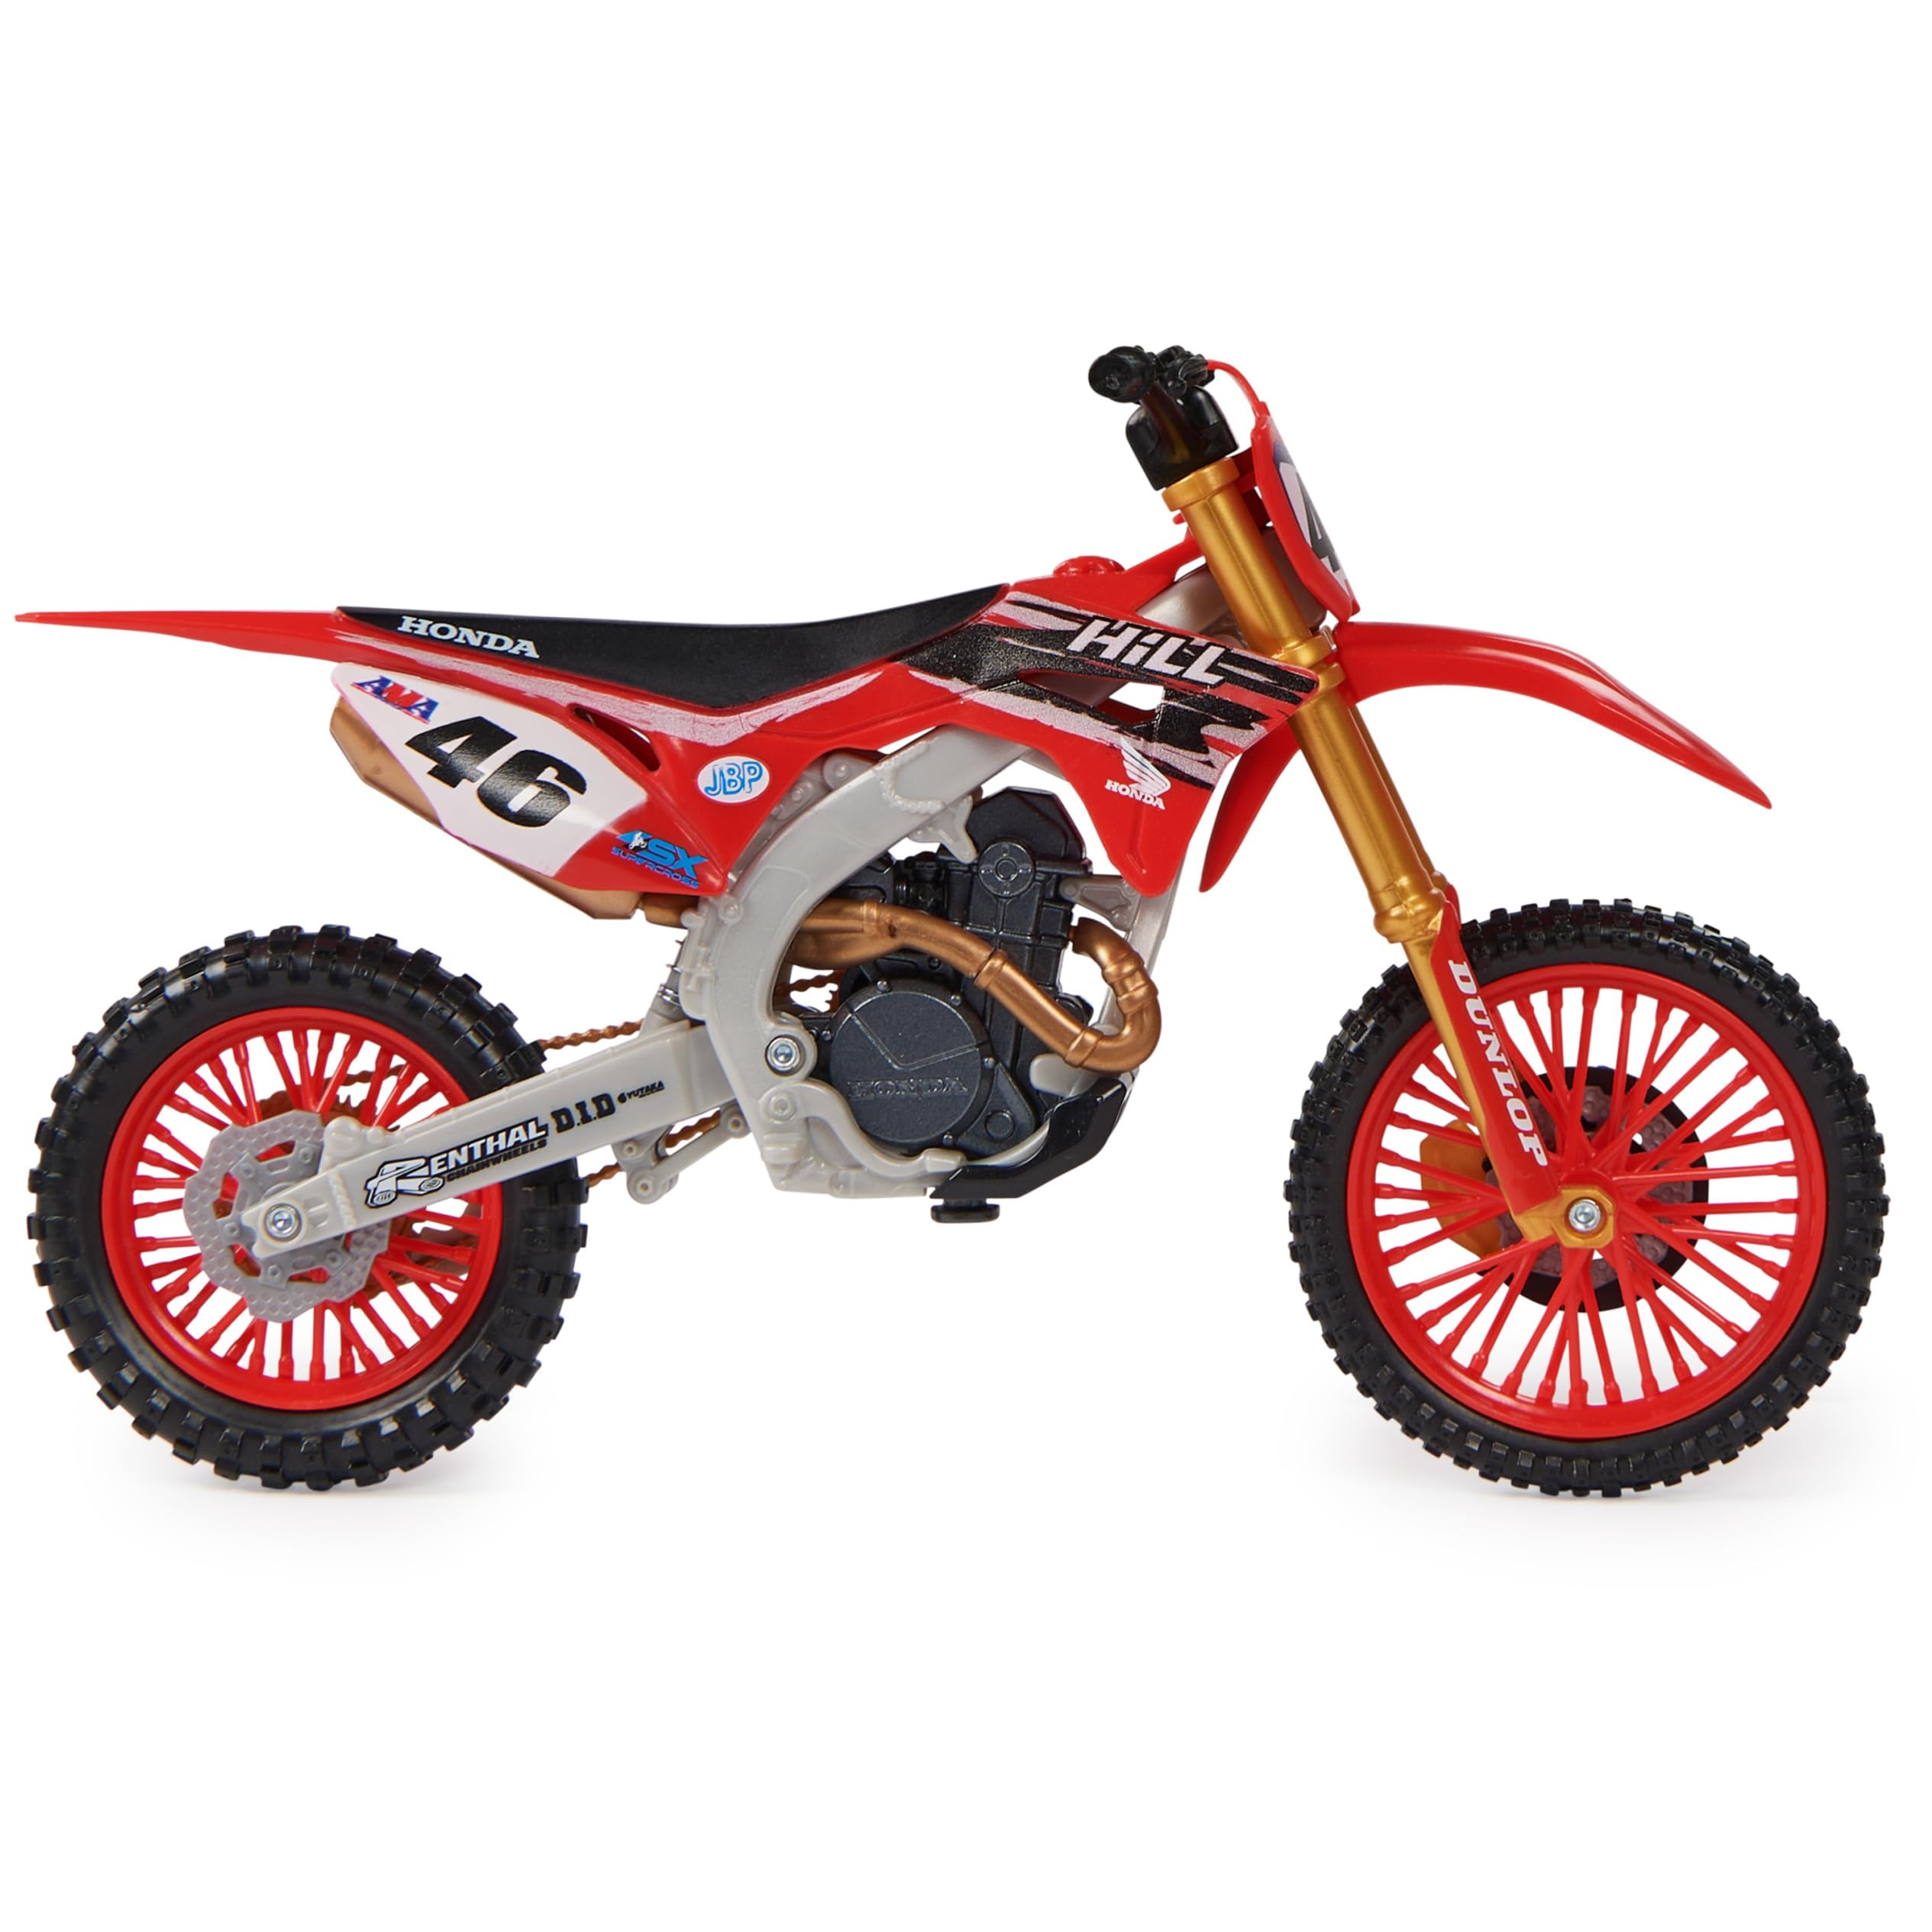 Supercross, Authentic Justin Hill 1:10 Scale Collector Die-Cast Toy Motorcycle Replica with Race Stand, for Collectors and Kids Age 5 and Up